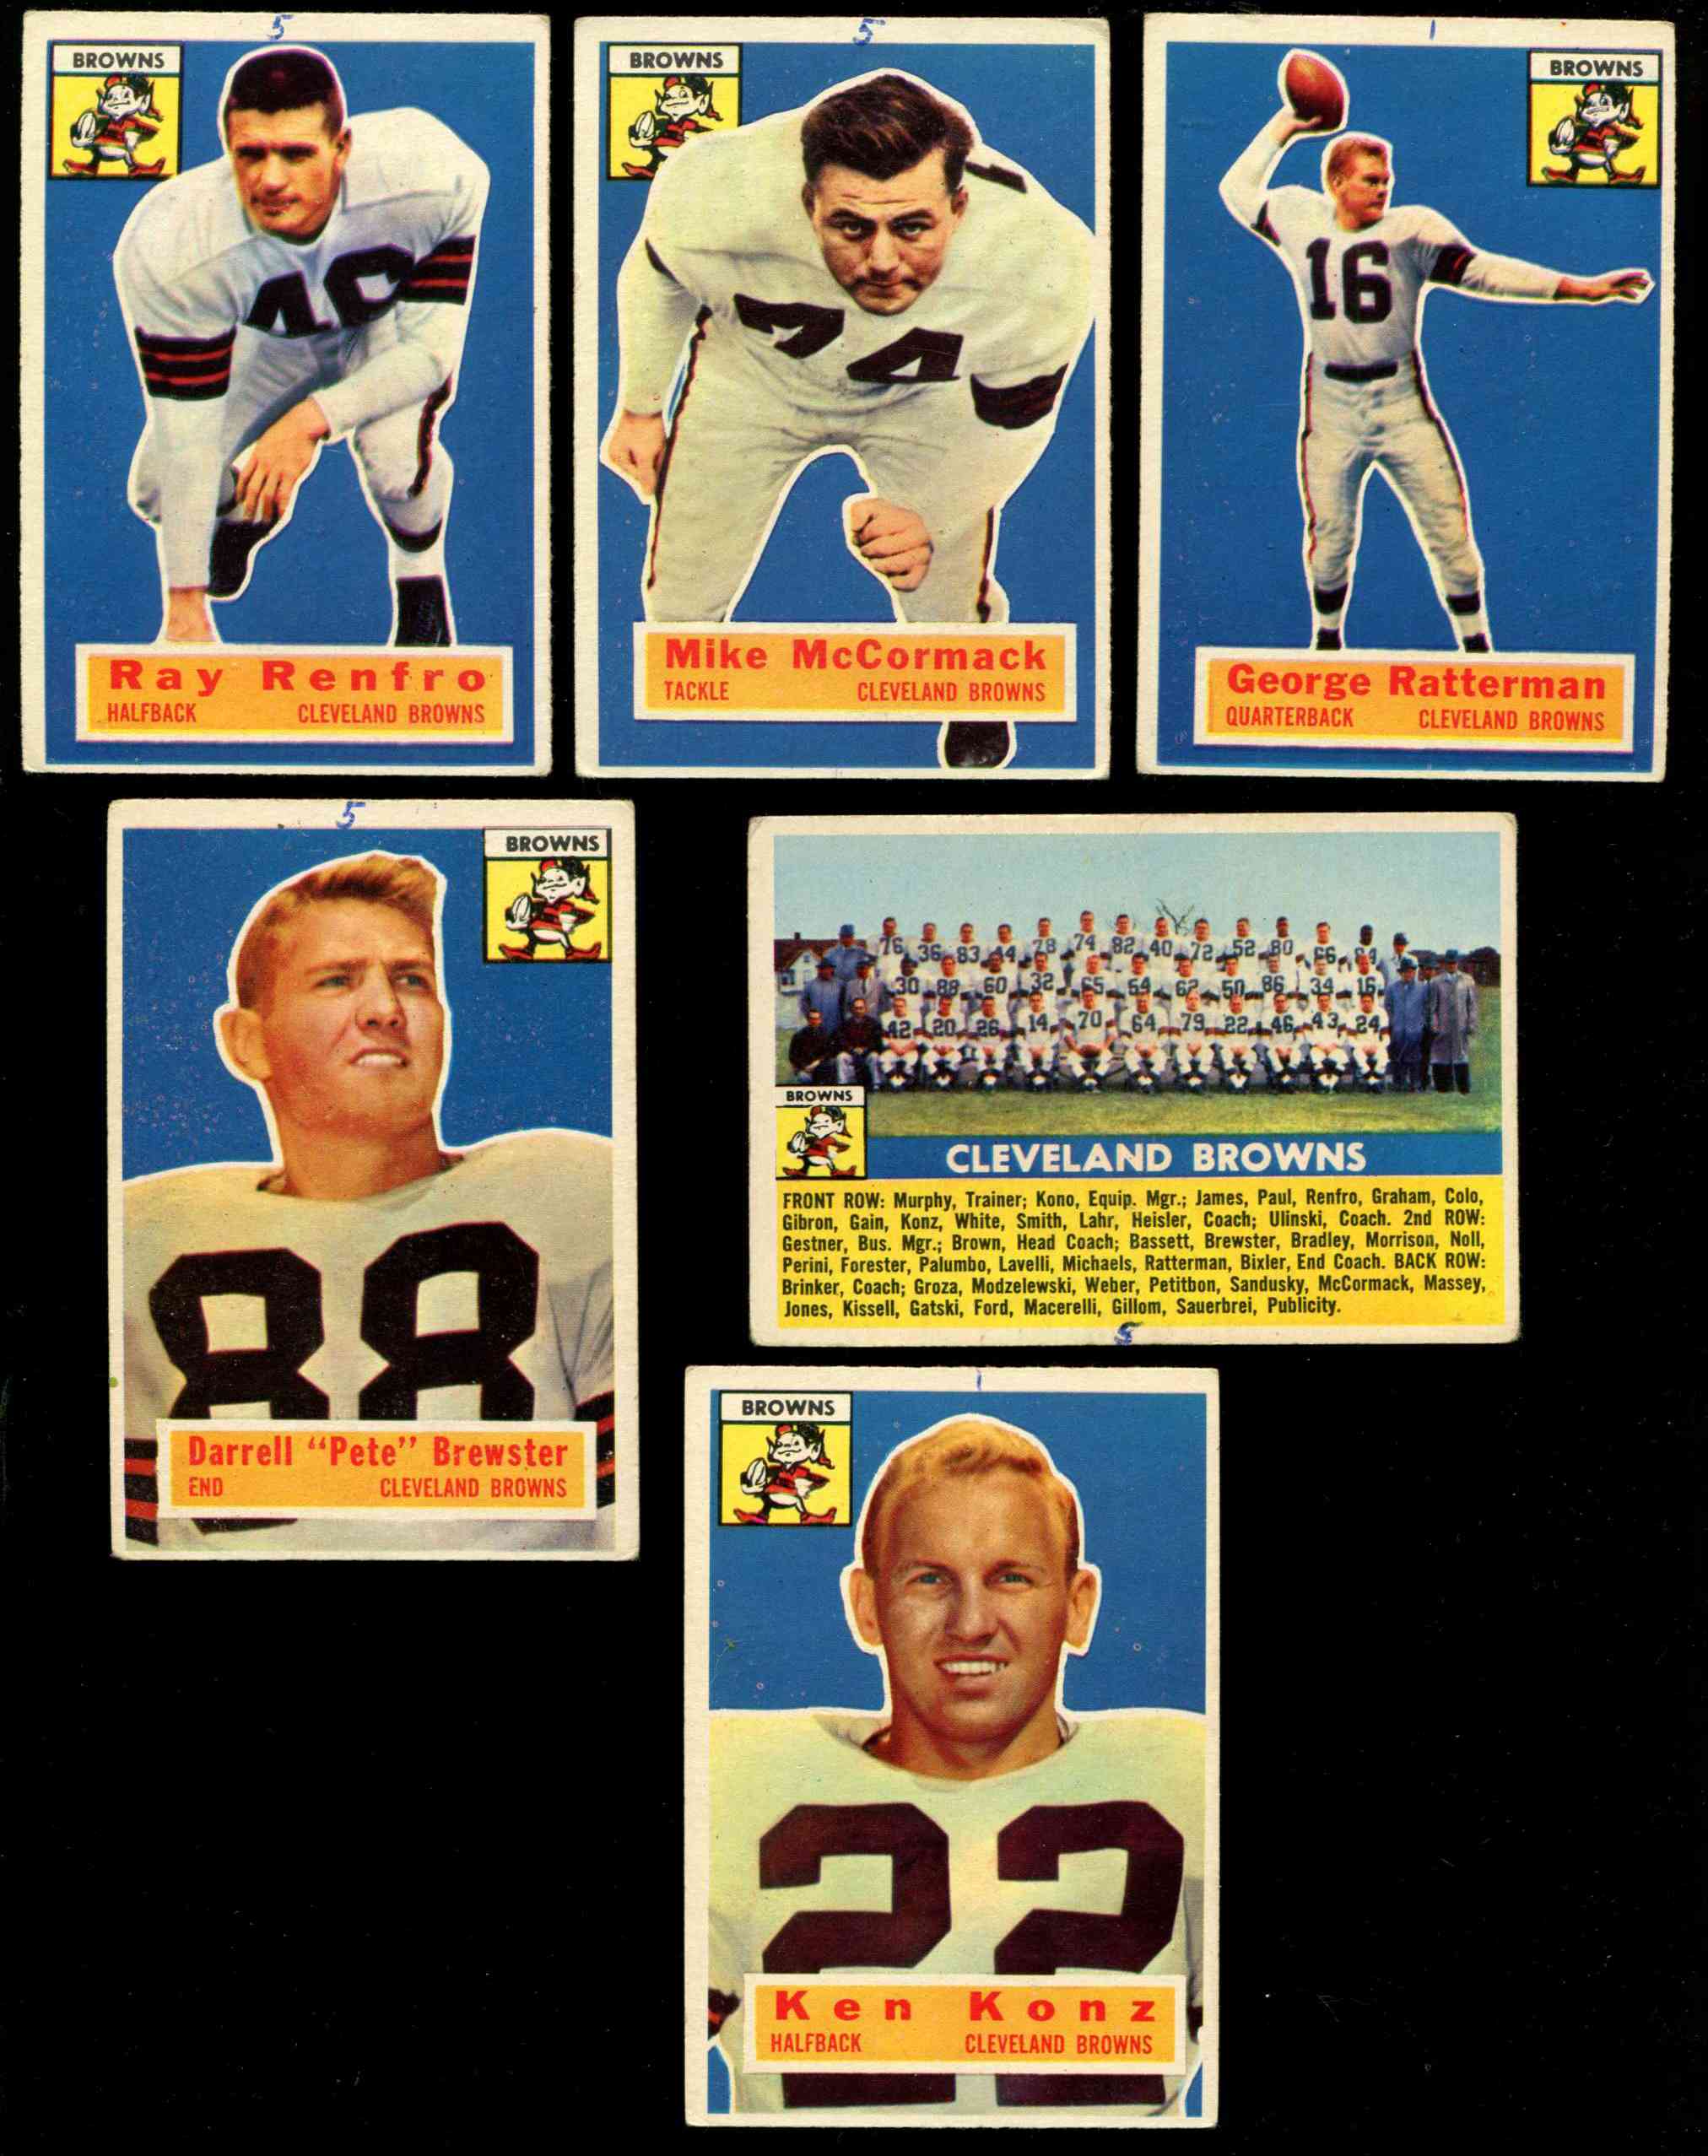  Cleveland BROWNS - 1956 Topps Football Team Lot (6) w/Team card Football cards value